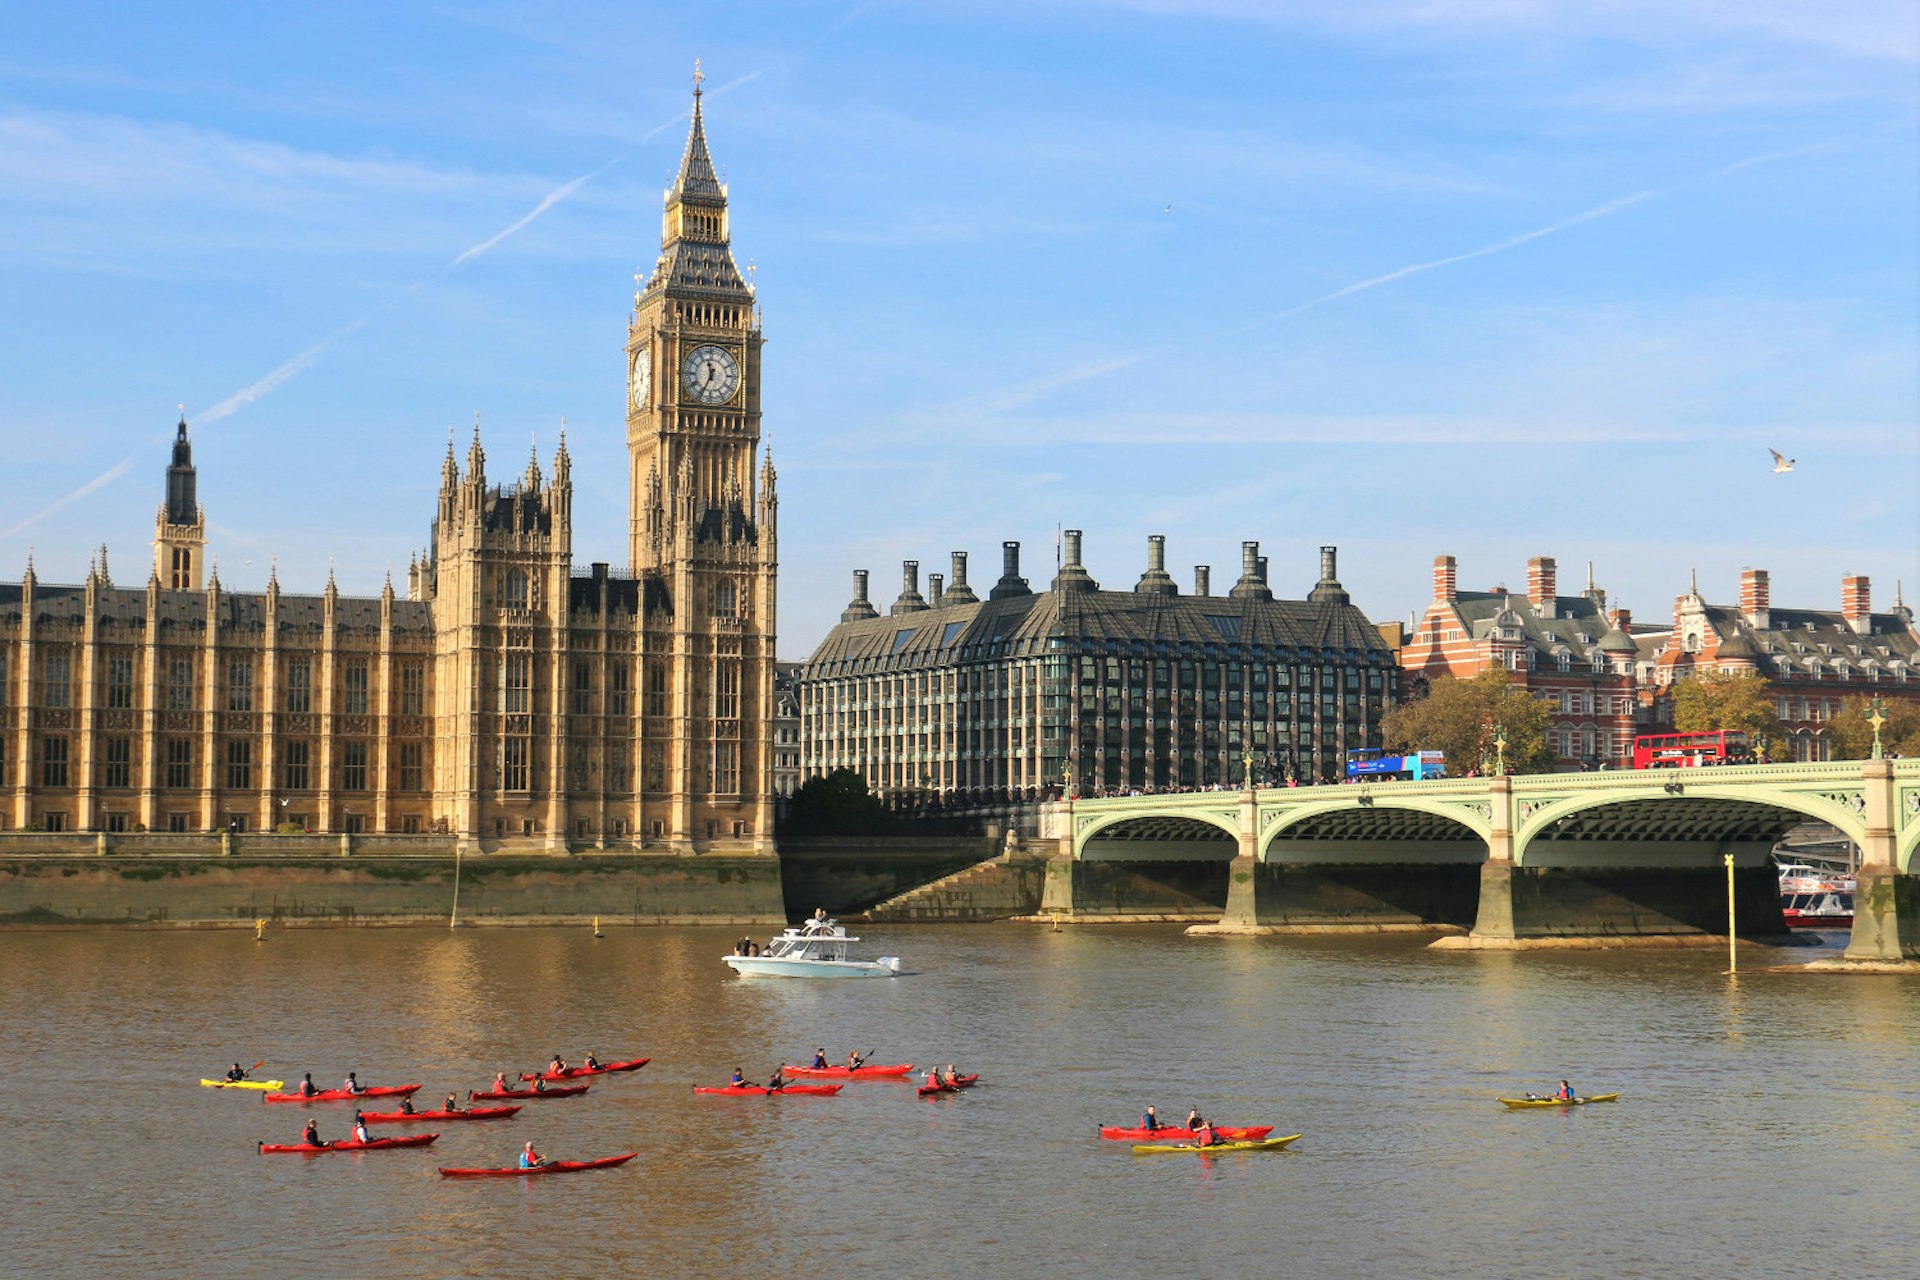 Kayaks on the Thames. Image by Heather Carswell / Lonely Planet